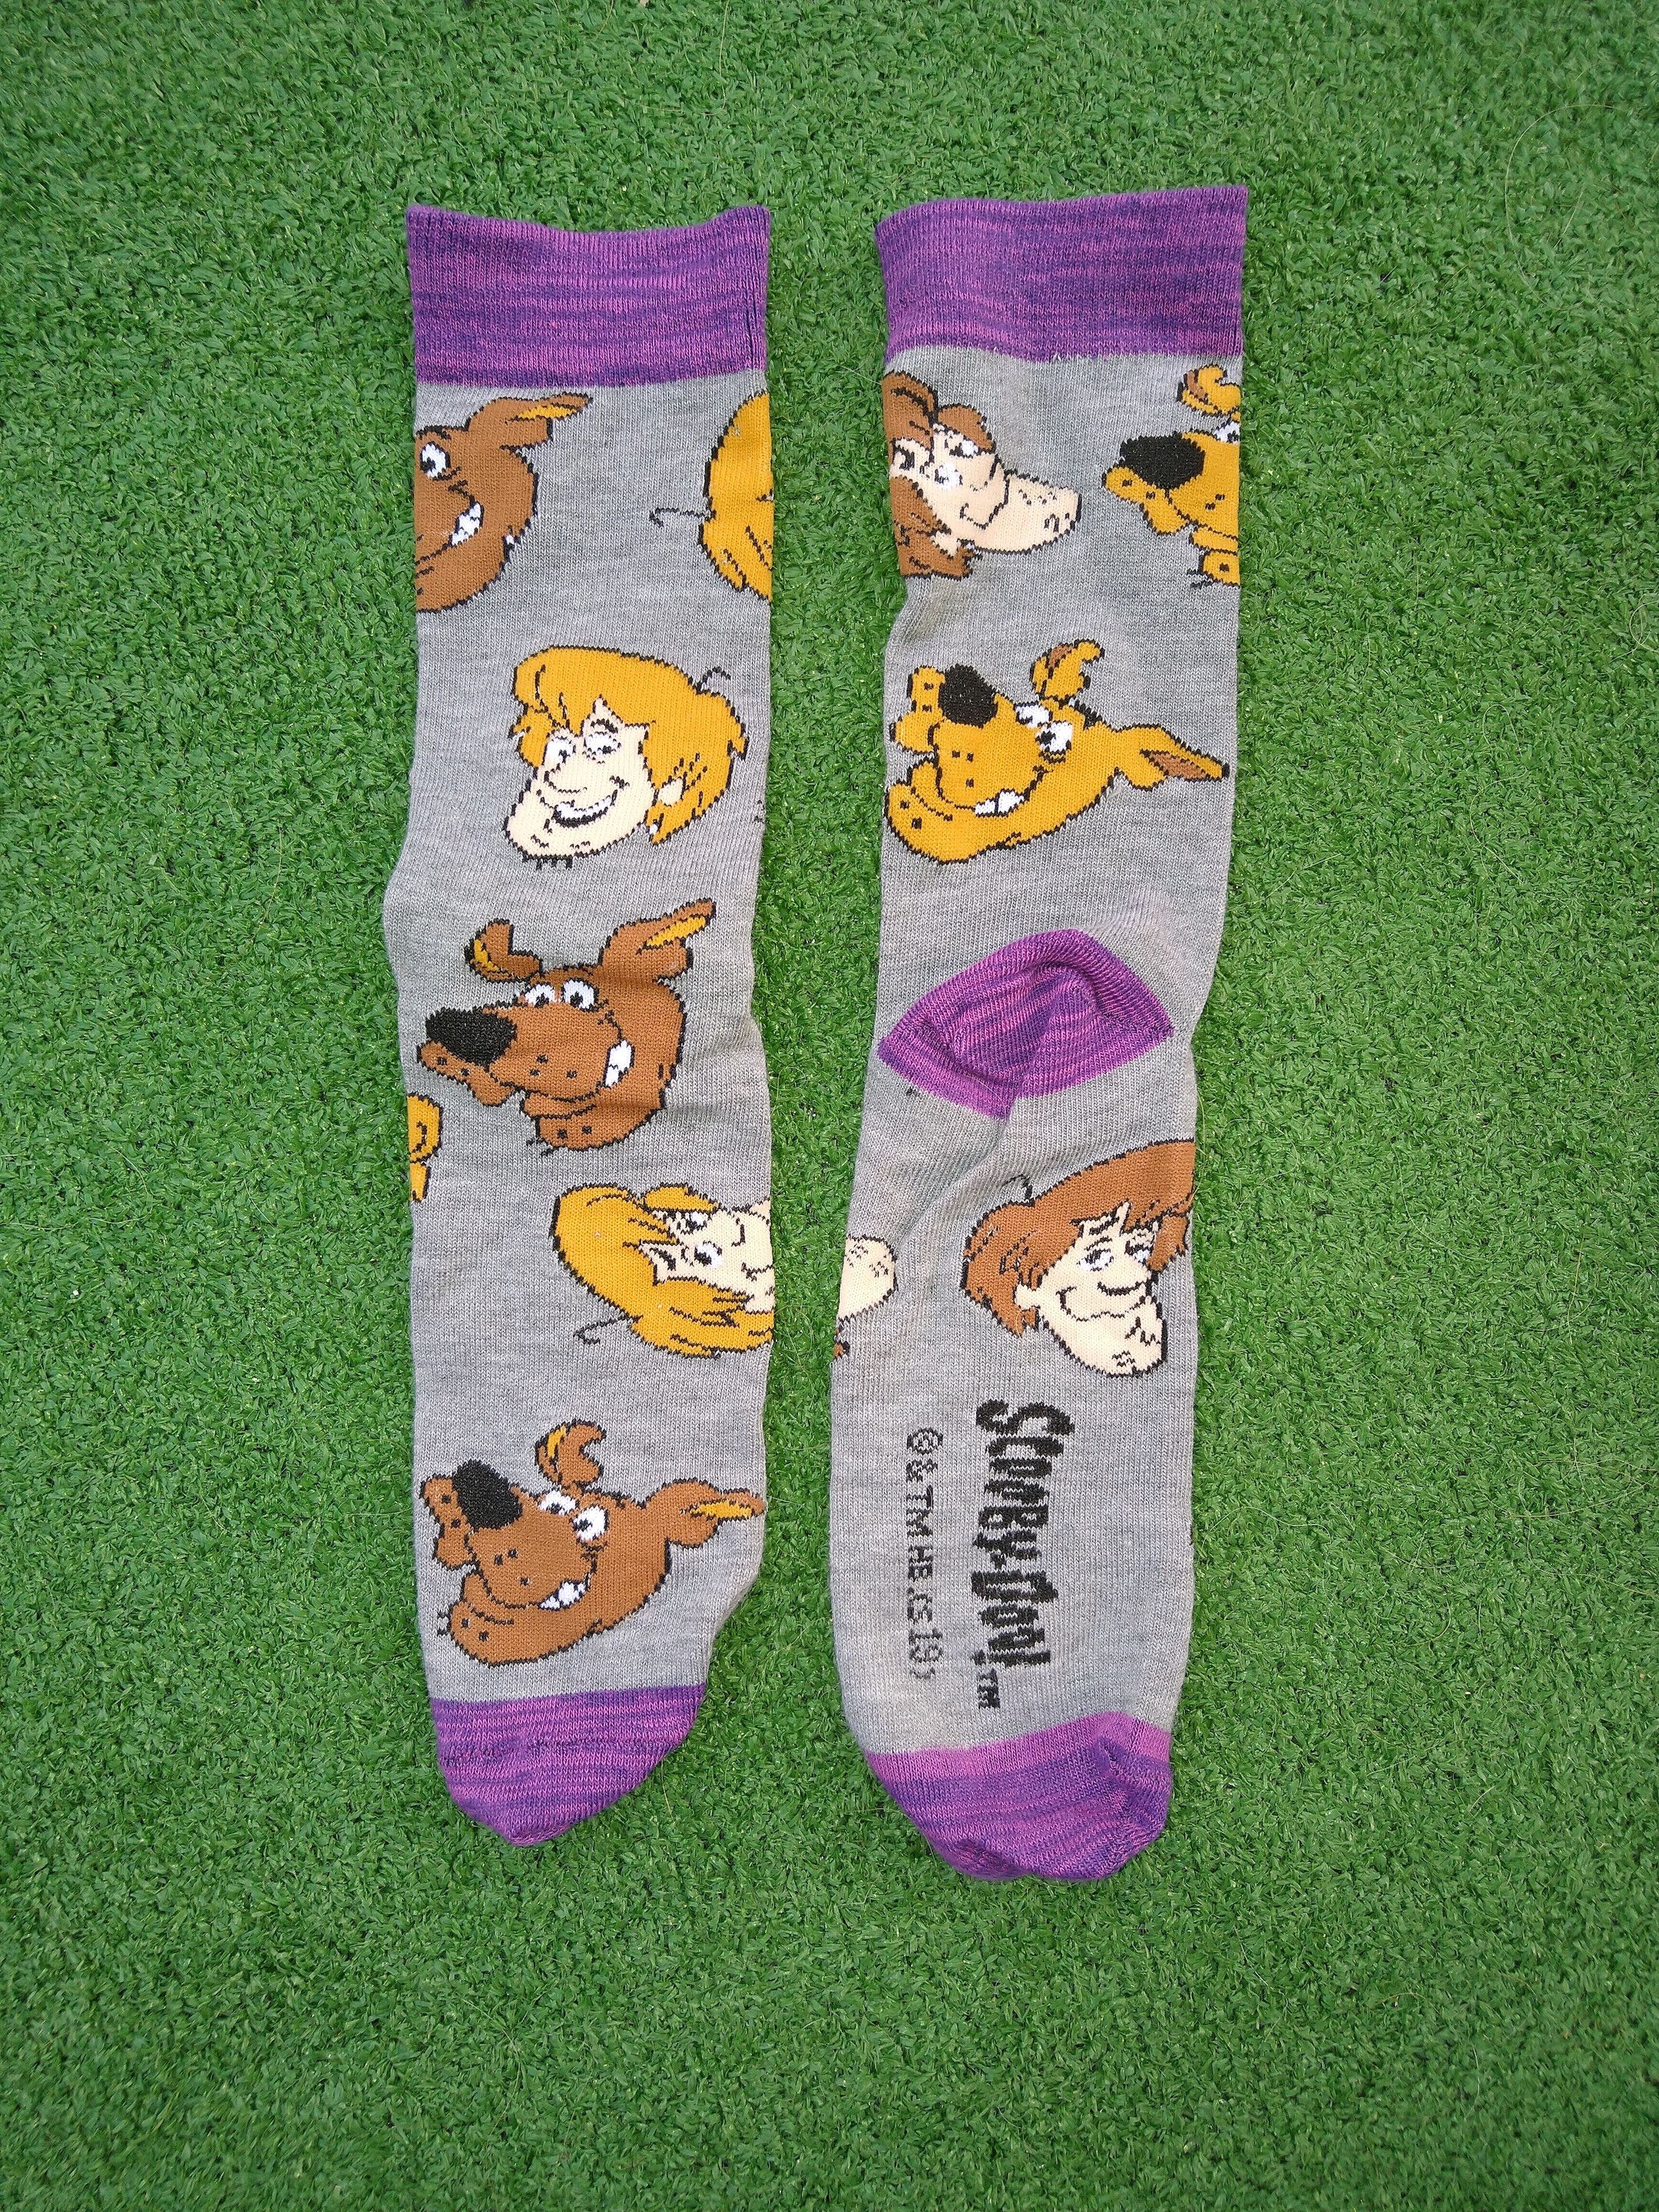 Streetwear Shaggy&Scooby Doo Cartoon Faces Multi Print Crew Socks Size ONE SIZE - 1 Preview